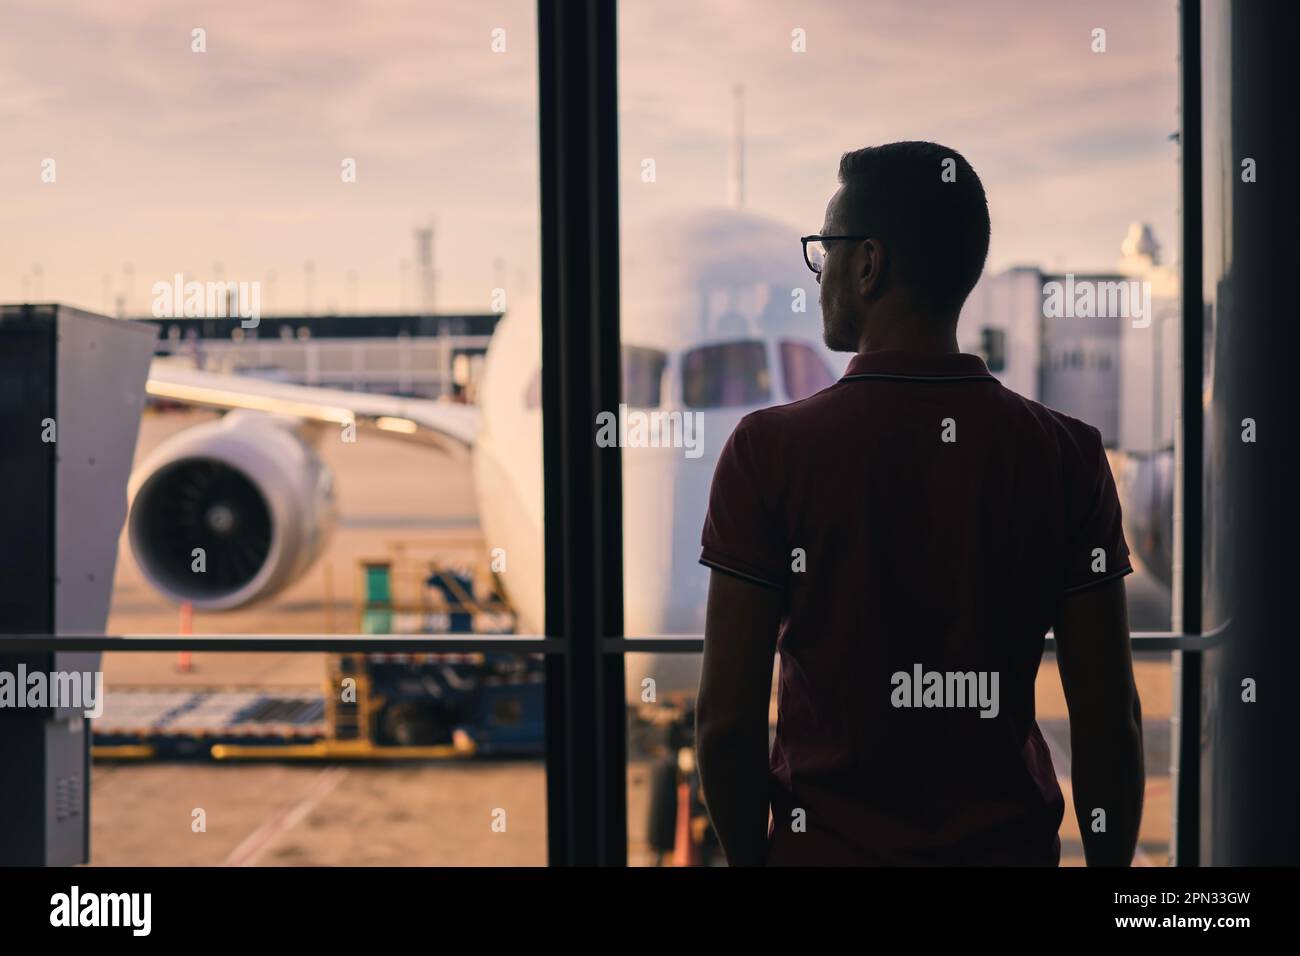 Traveler is looking out of airport window at airplane. Silhouette of man waiting for his flight. Stock Photo